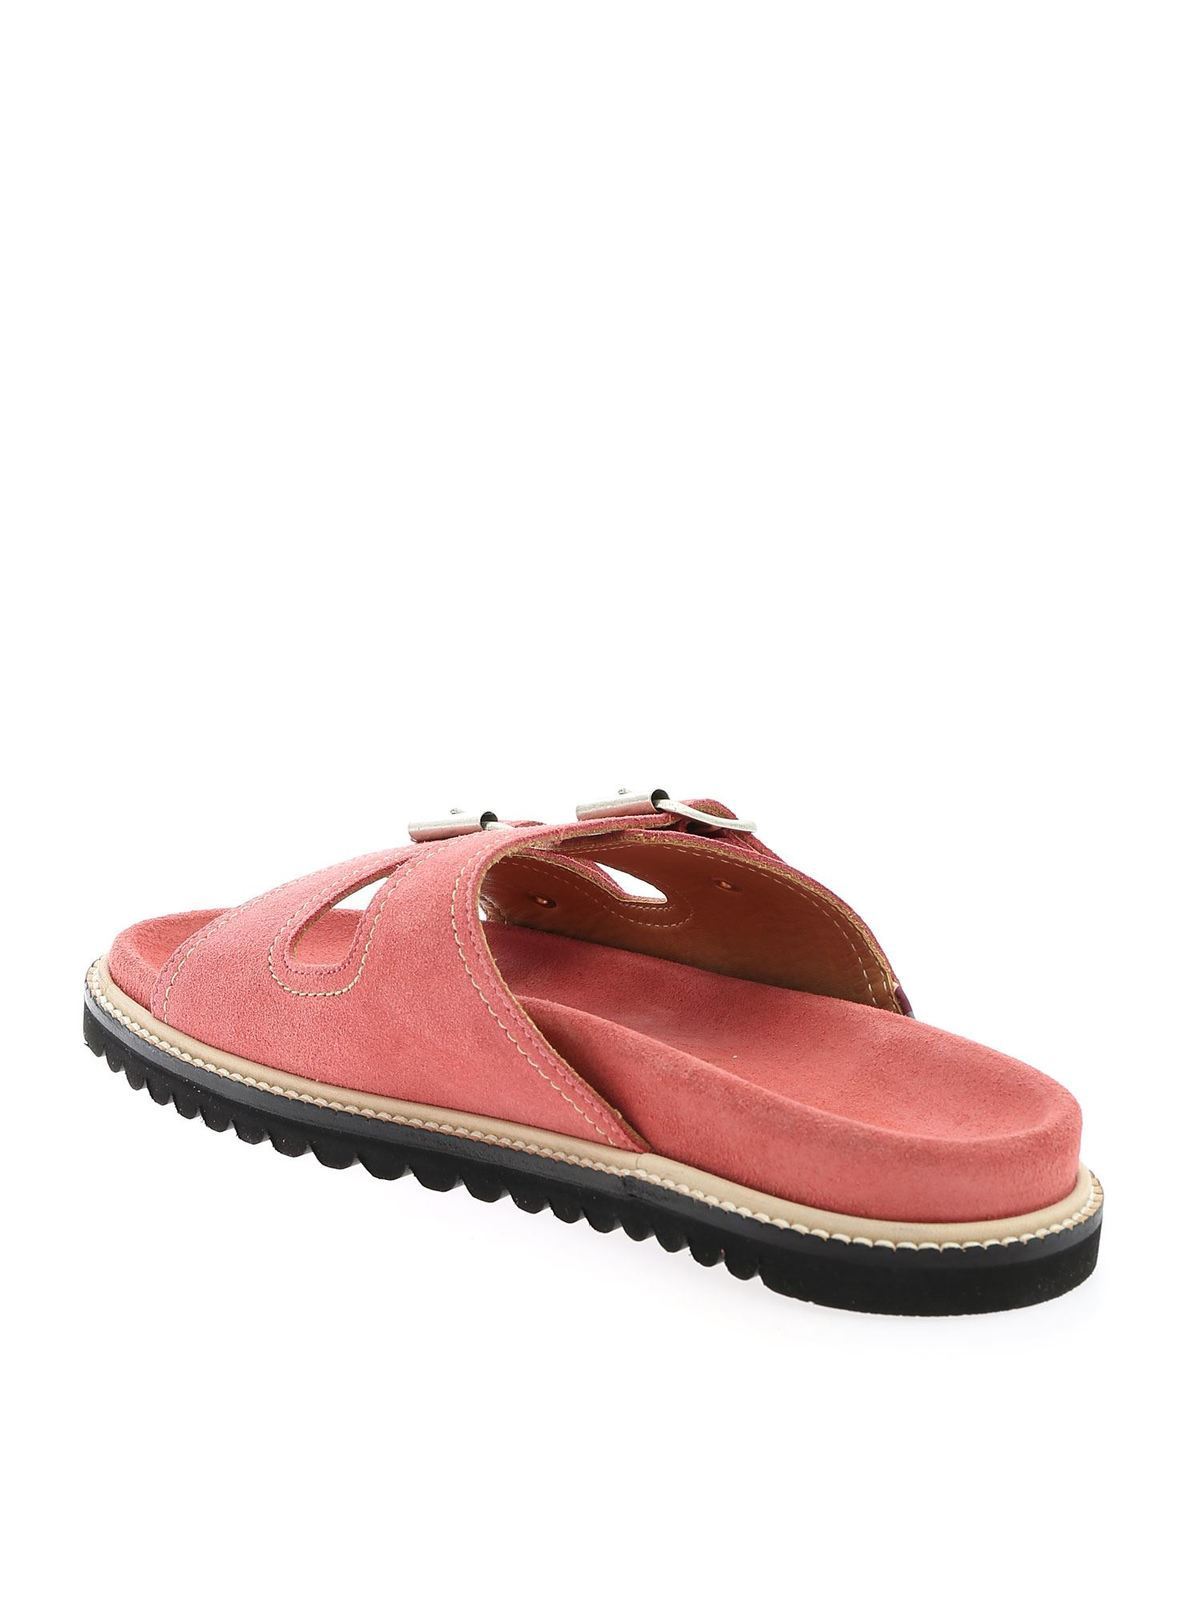 Sandals Smith - Double buckle sandals in pink - WS1PNX02FSUE20